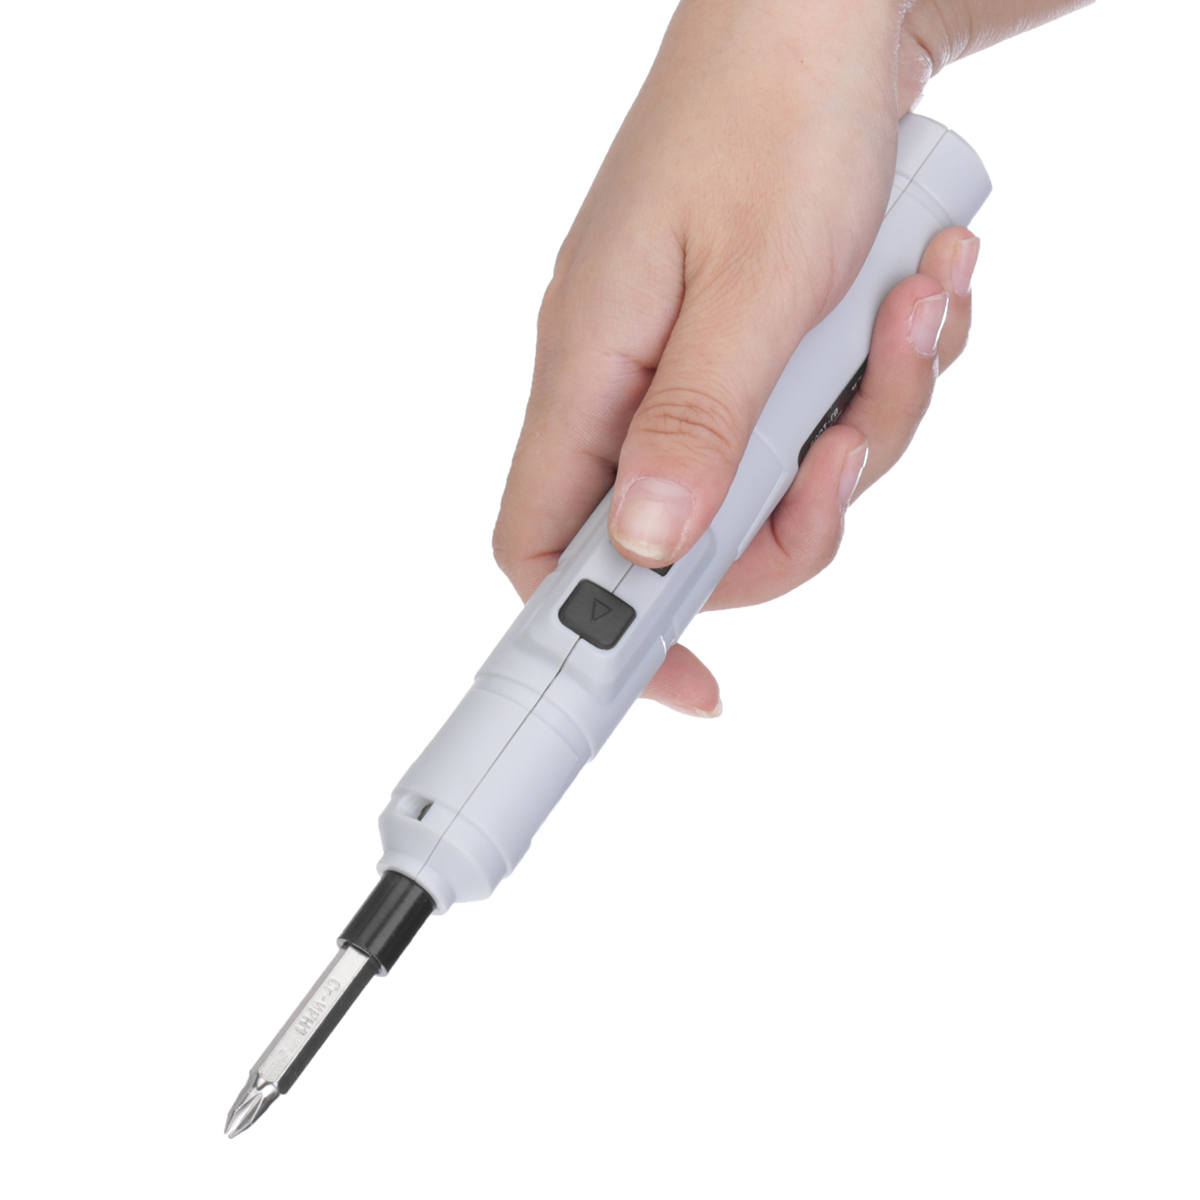 DC36V-Mini-Lithium-Cordless-Electric-Screwdriver-Power-Screw-Driver-DIY-Tool-With-USB-Charger-1582416-5